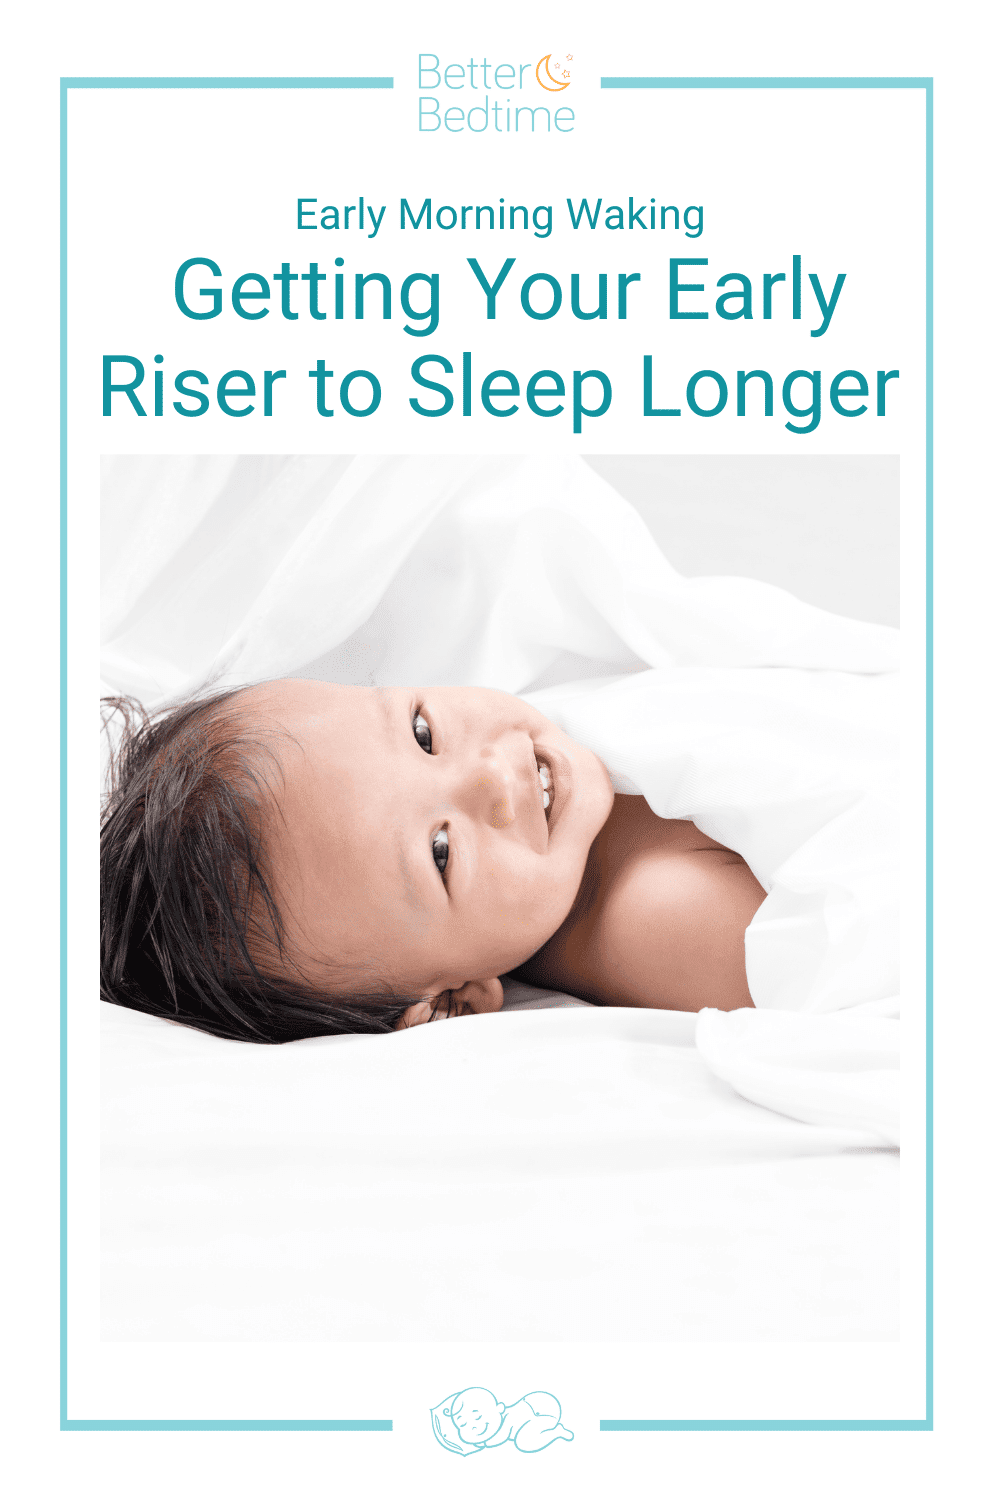 Early Morning Waking: Getting Your Early Riser to Sleep Longer